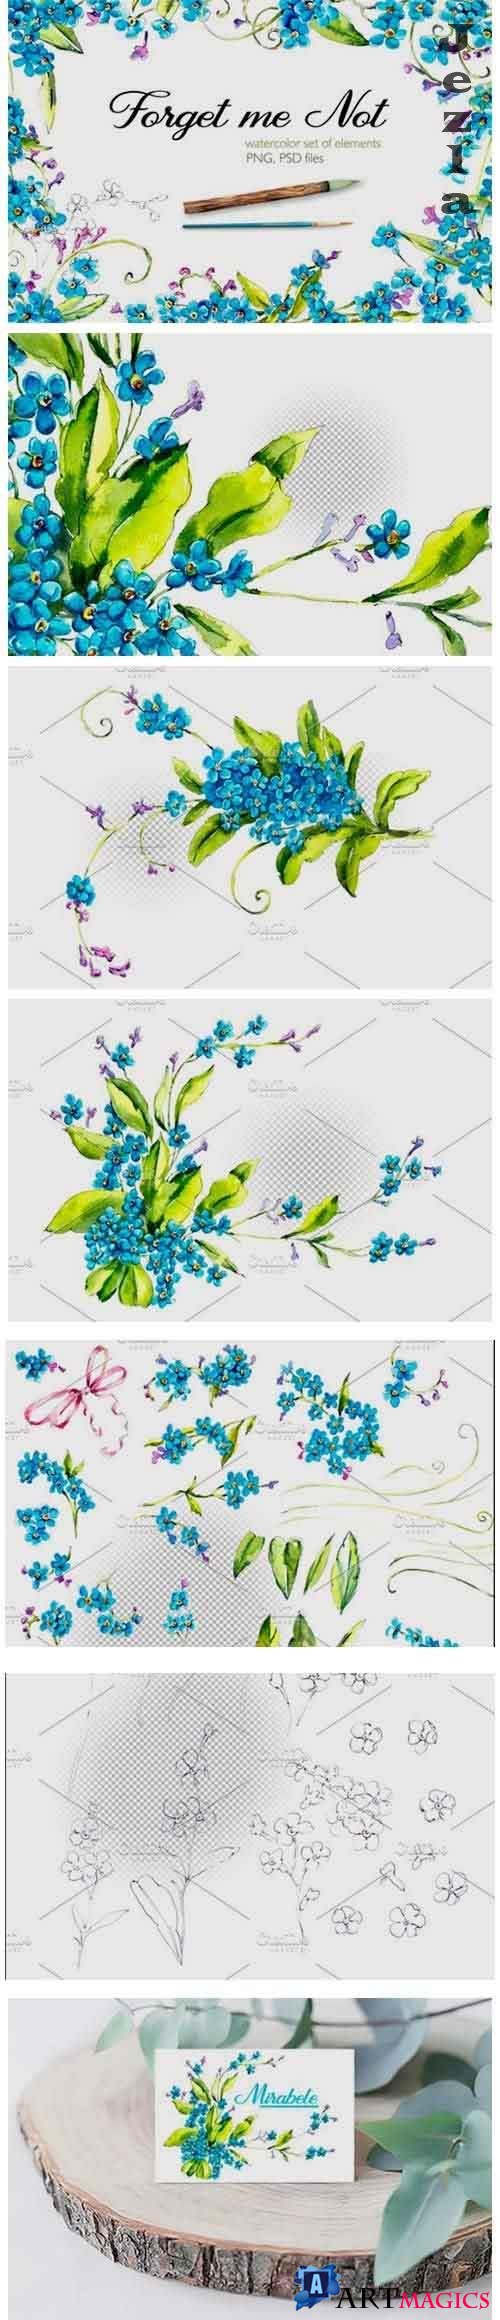 Watercolor forget-me-nots - 3825293